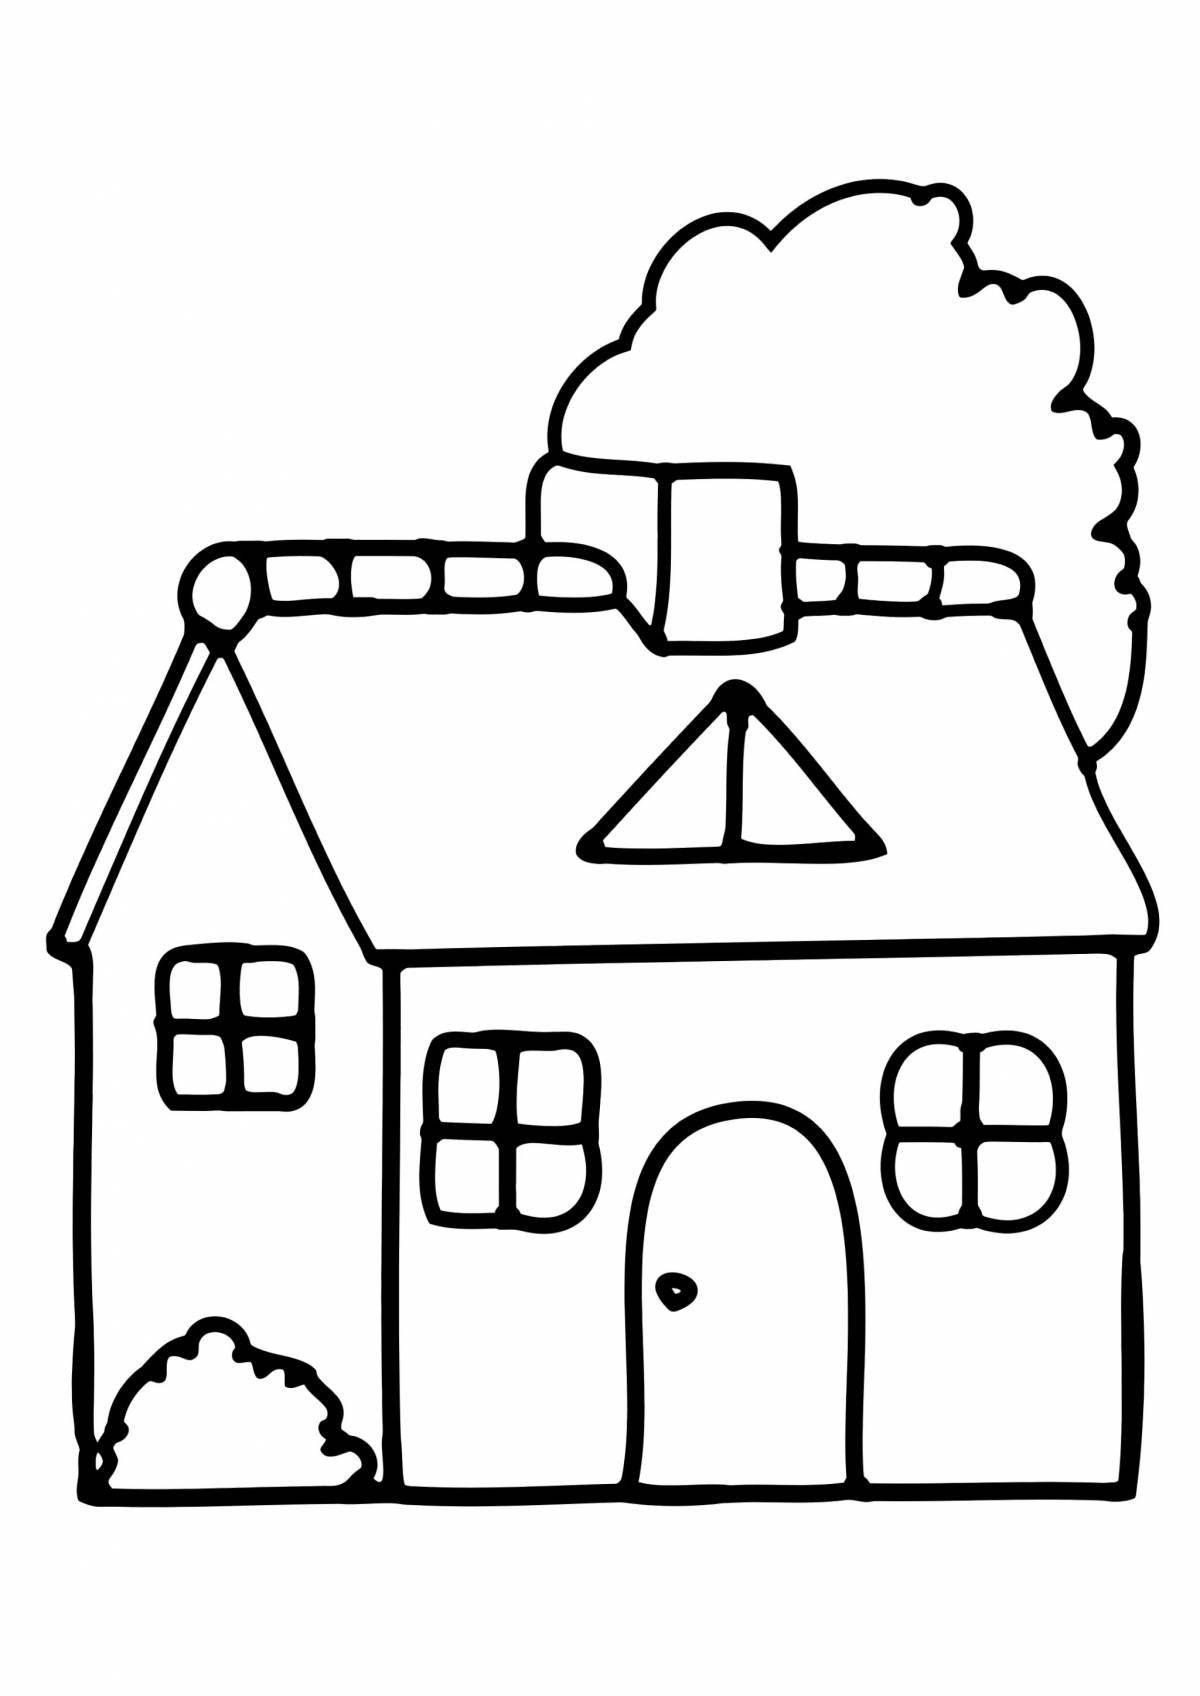 Coloring page dazzling house